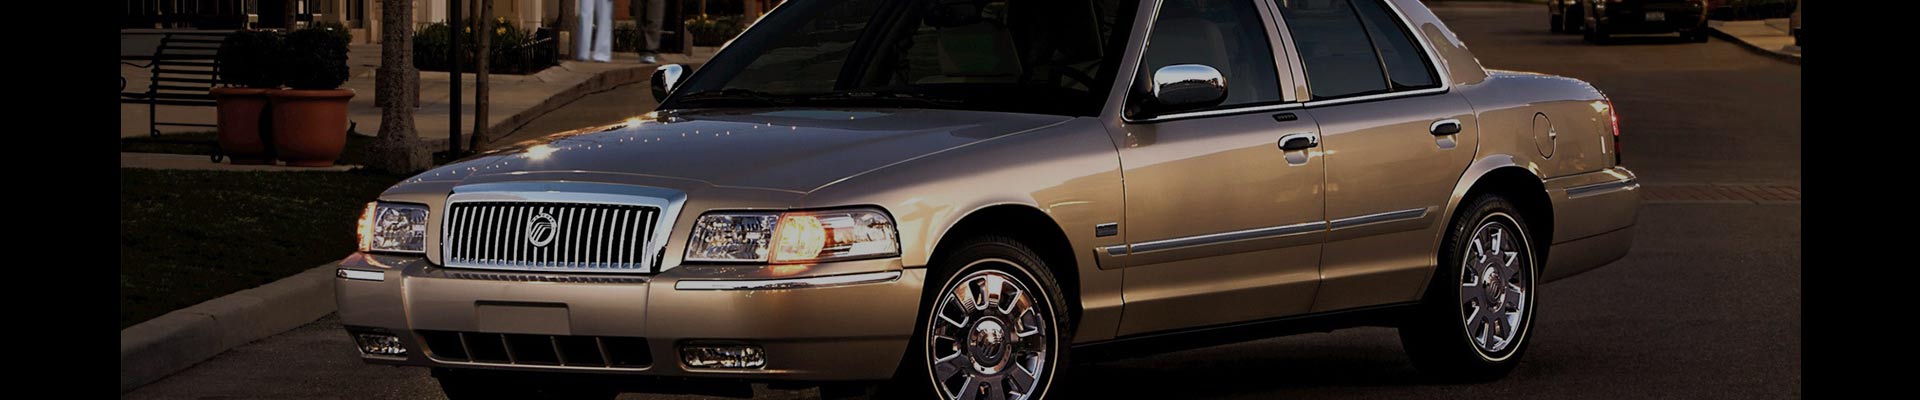 Shop Replacement and OEM 1999 Mercury Grand Marquis Parts with Discounted Price on the Net